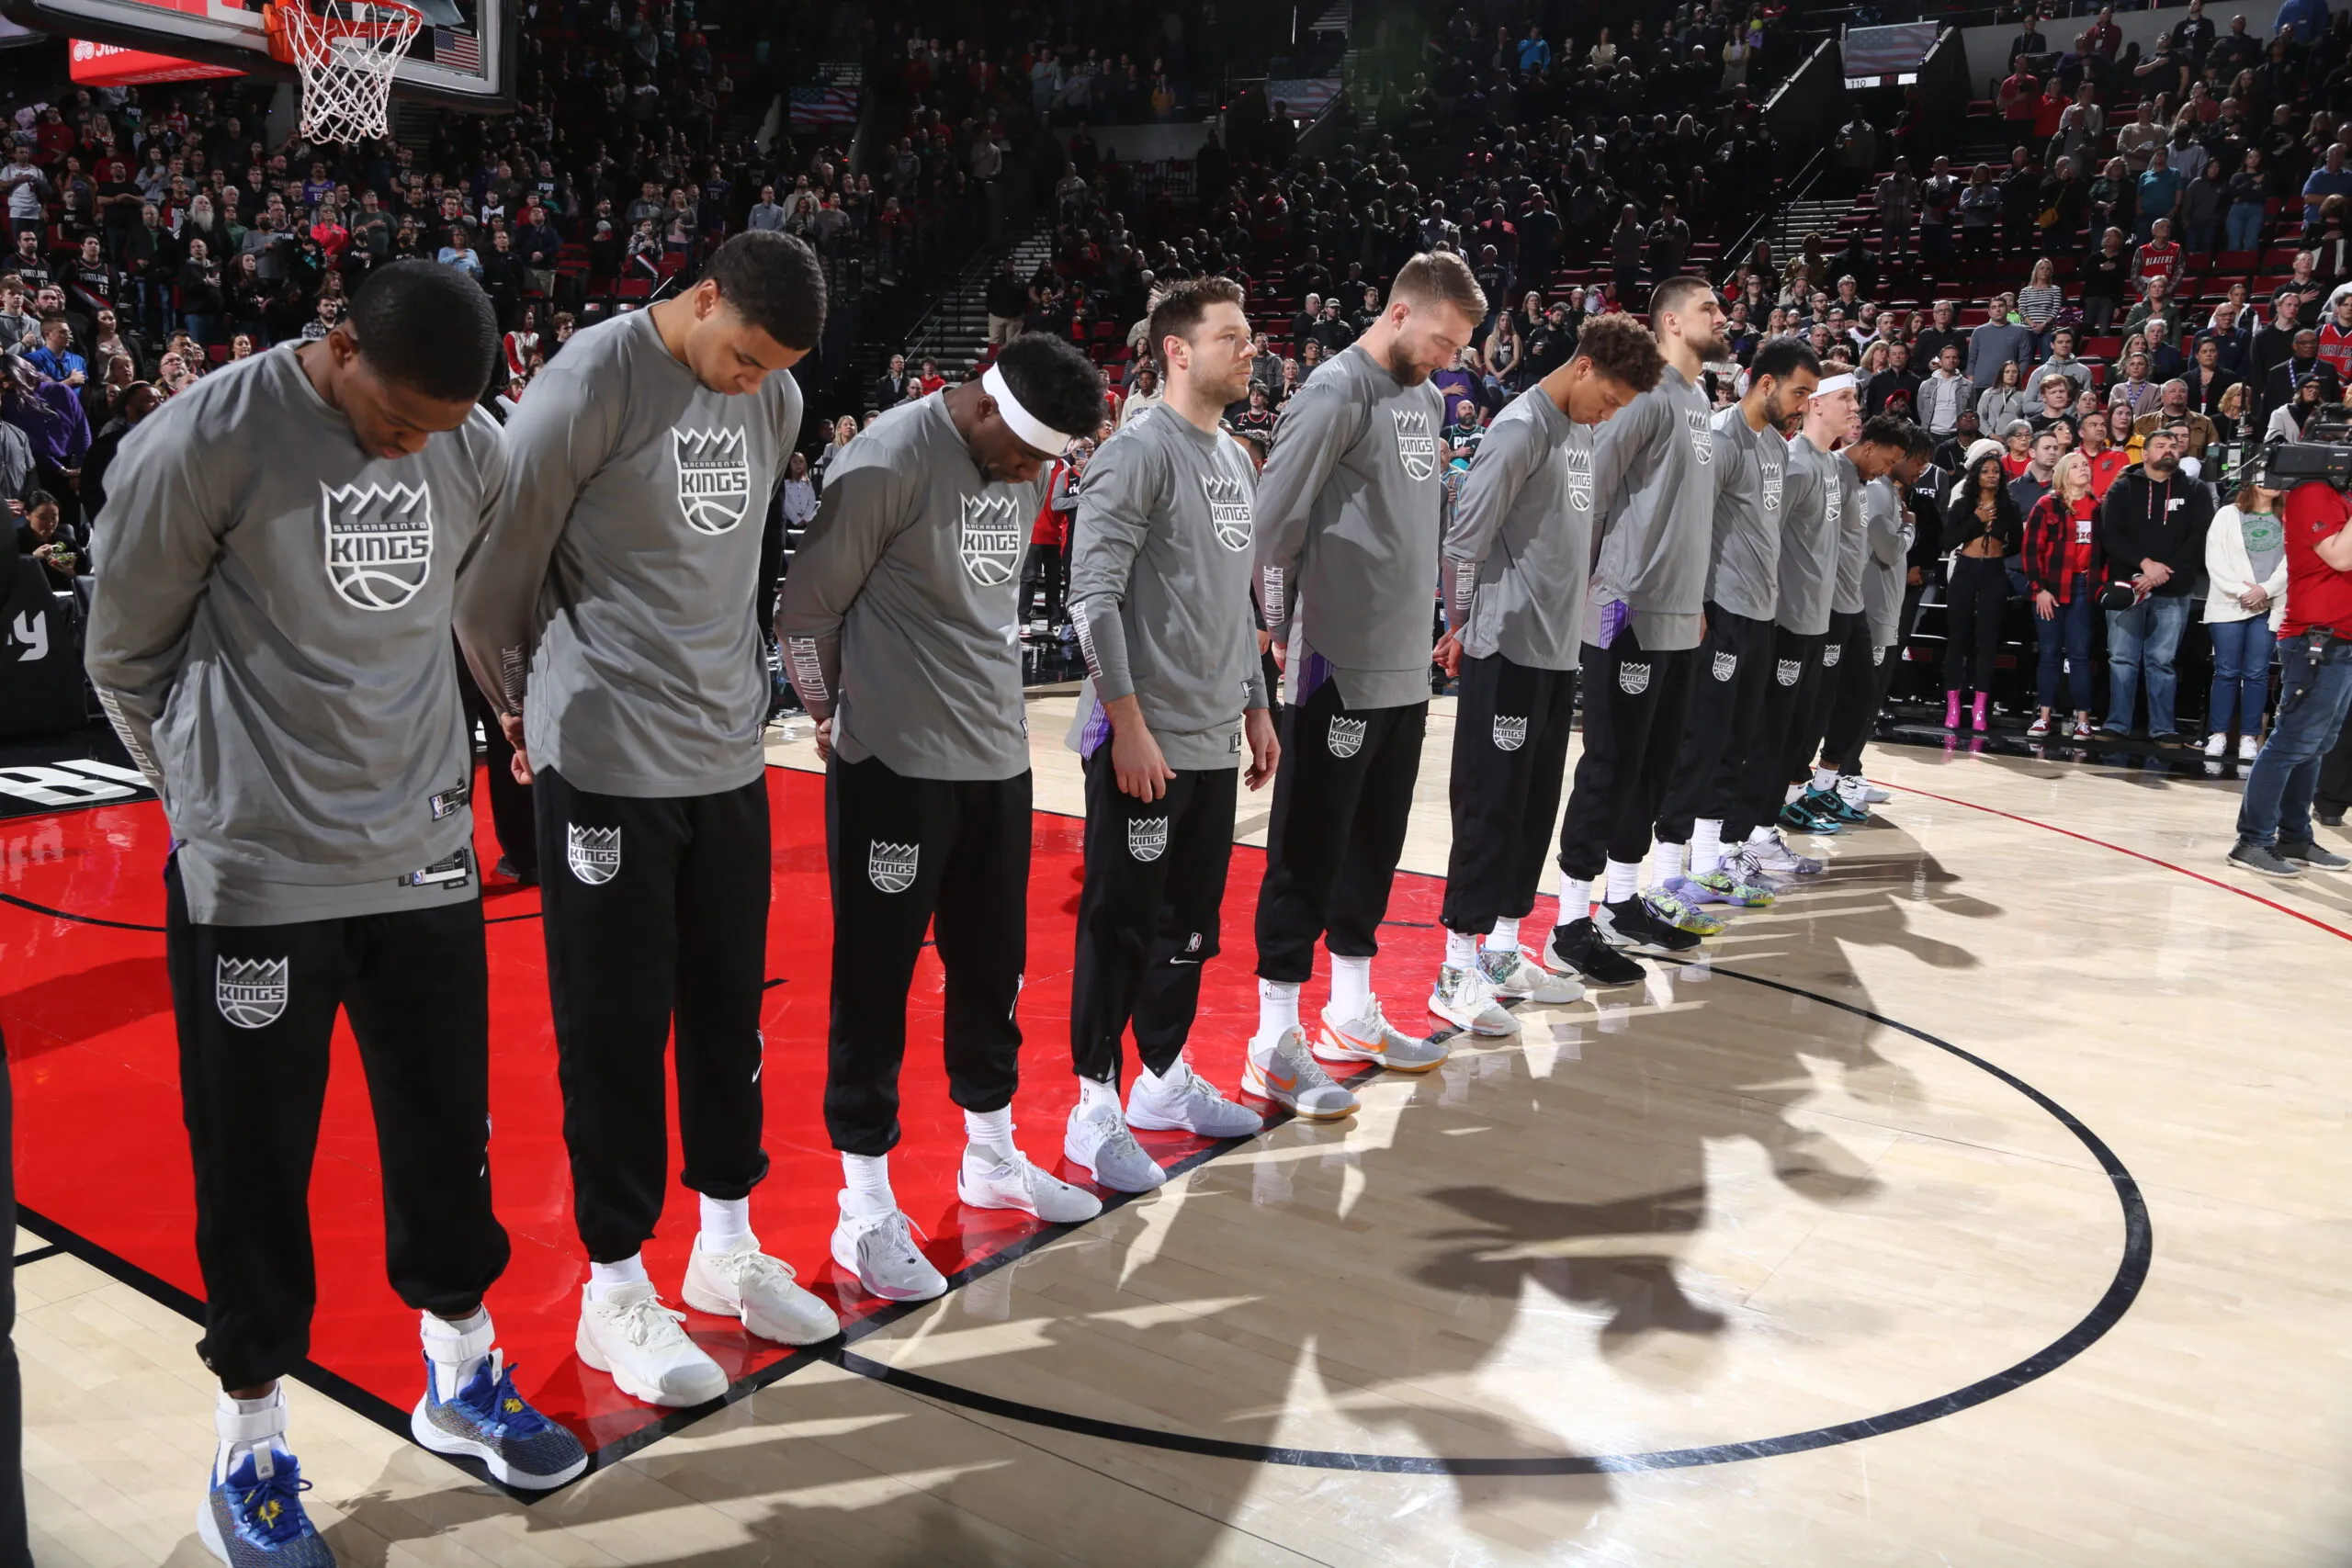 PORTLAND, OR - MARCH 29:  Overall look at the Sacramento Kings during the National Anthem on March 29, 2023 at the Moda Center Arena in Portland, Oregon. NOTE TO USER: User expressly acknowledges and agrees that, by downloading and or using this photograph, user is consenting to the terms and conditions of the Getty Images License Agreement. Mandatory Copyright Notice: Copyright 2023 NBAE (Photo by Sam Forencich/NBAE via Getty Images)